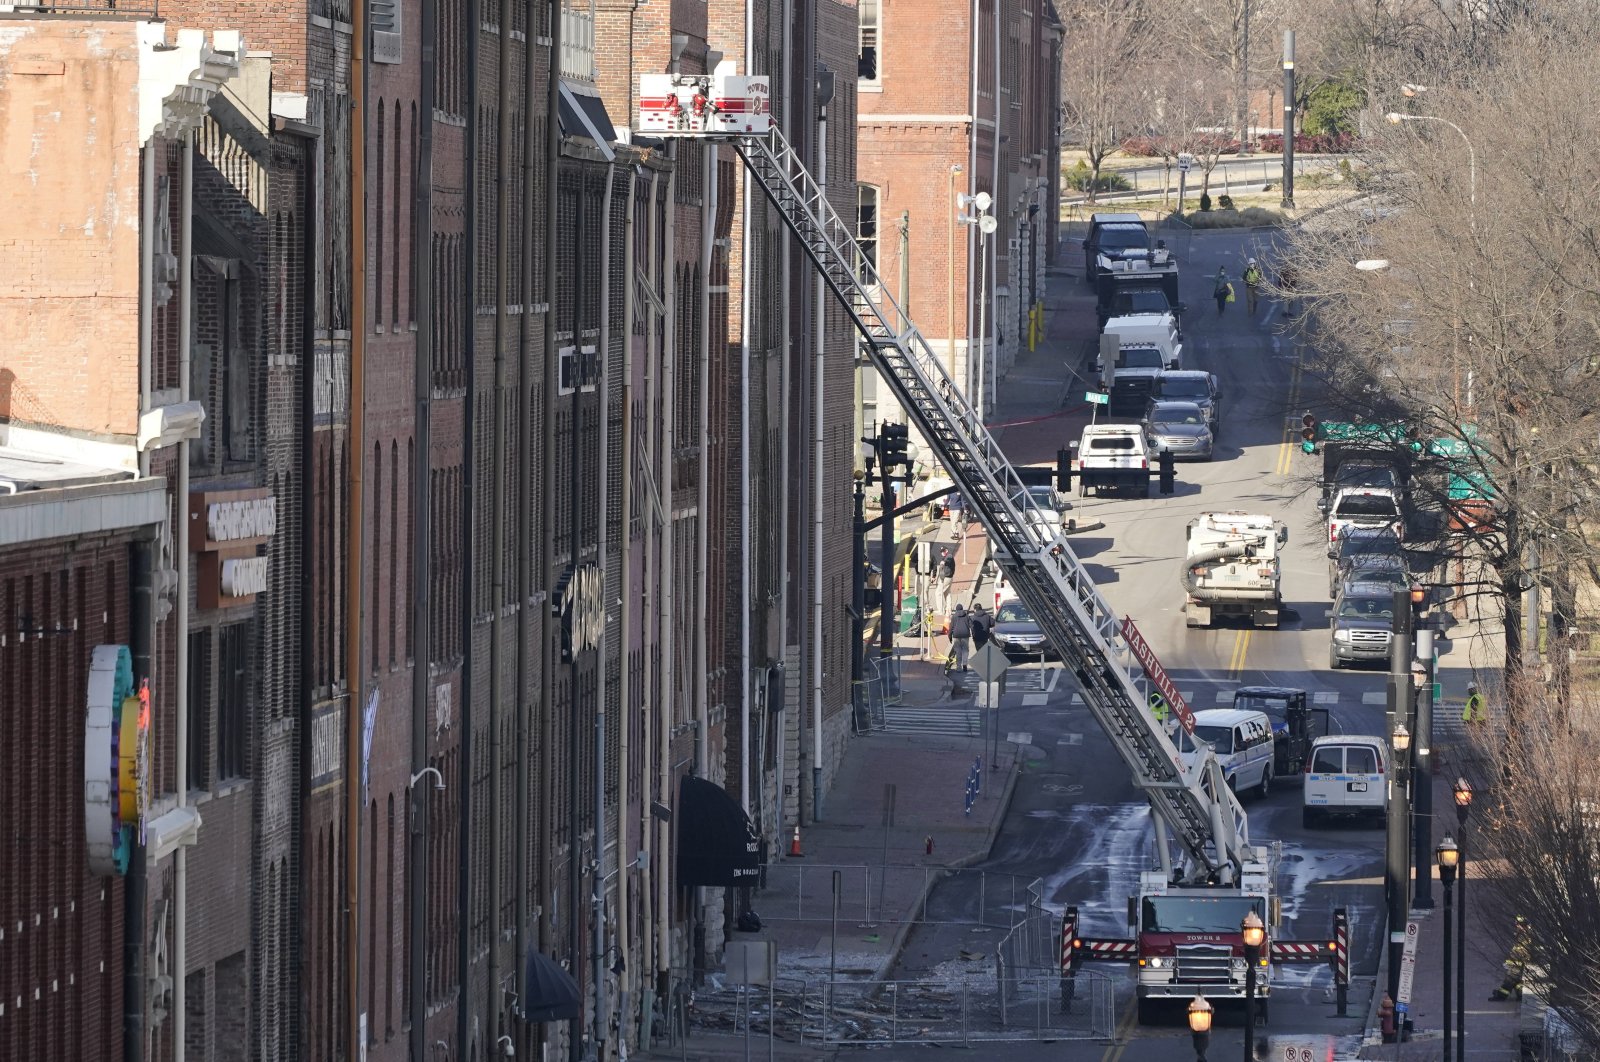 Firefighters ride on an aerial ladder as they inspect buildings damaged in a Christmas Day explosion in Nashville, Tennessee, U.S., Dec. 28, 2020. (AP Photo)